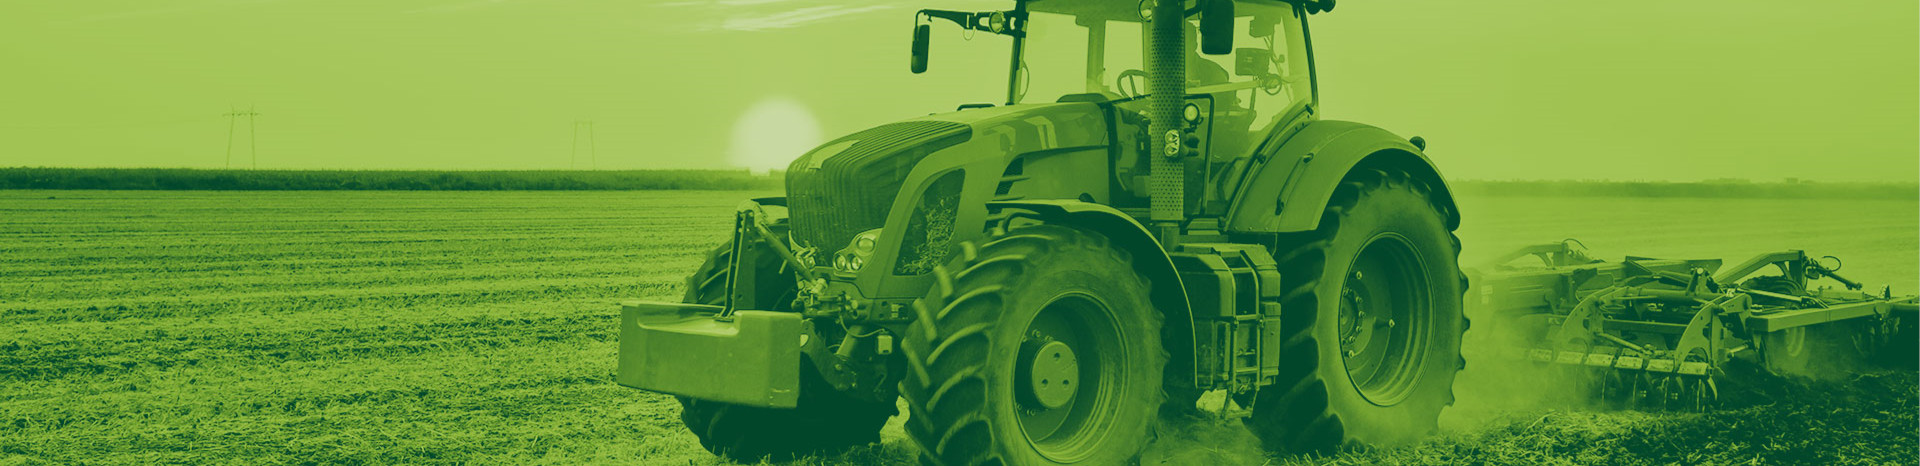 Solutions for Agricultural Equipment